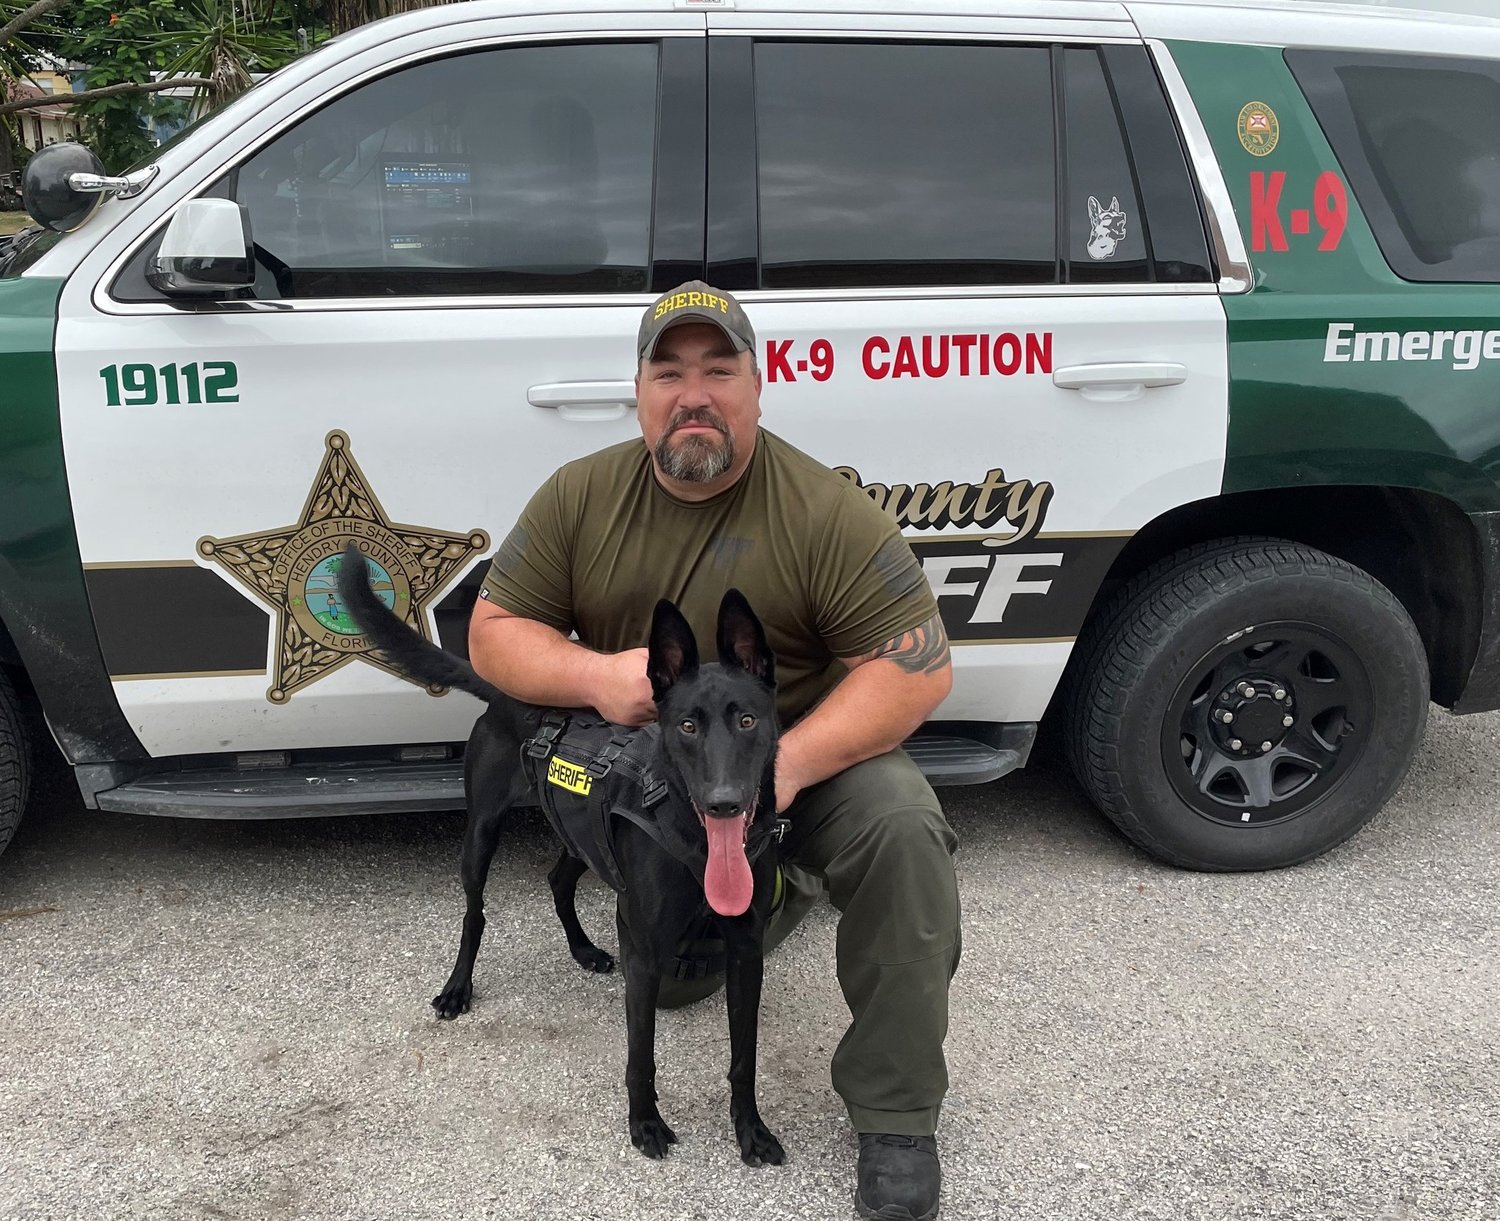 LABELLE -- Hendry County Sheriff’s Office is pleased to introduce the department's newest member K-9, Taz, and his handler Sgt. Lovadis Dominguez. Taz is a 2 year old Belgian Malinois and is a certified drug detection dog. Both Taz and Sgt. Dominguez have completed their training and are currently working together on the road. [Photo courtesy HCSO}